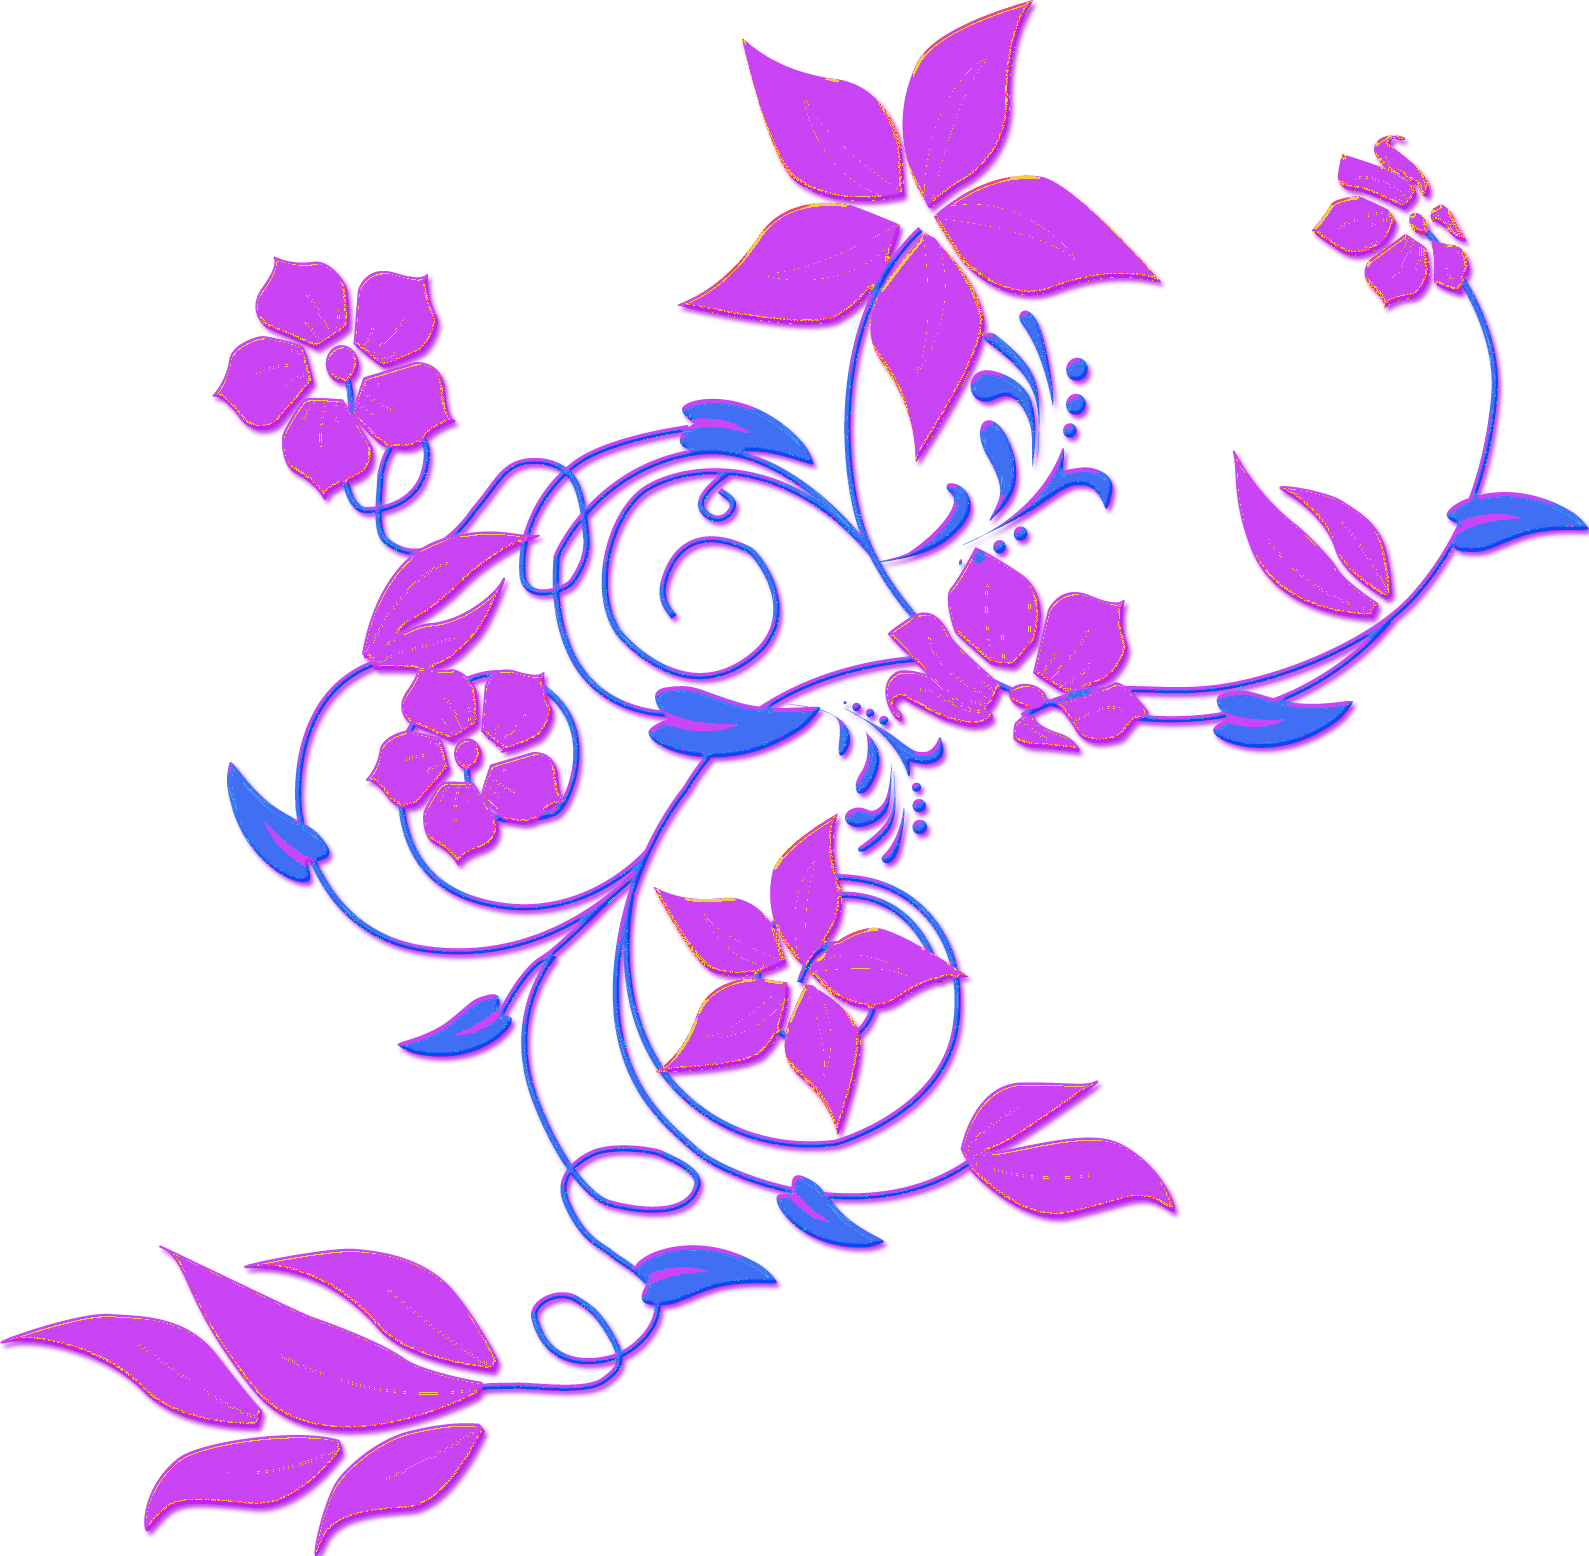 Free Flower Vector Png, Download Free Clip Art, Free Clip